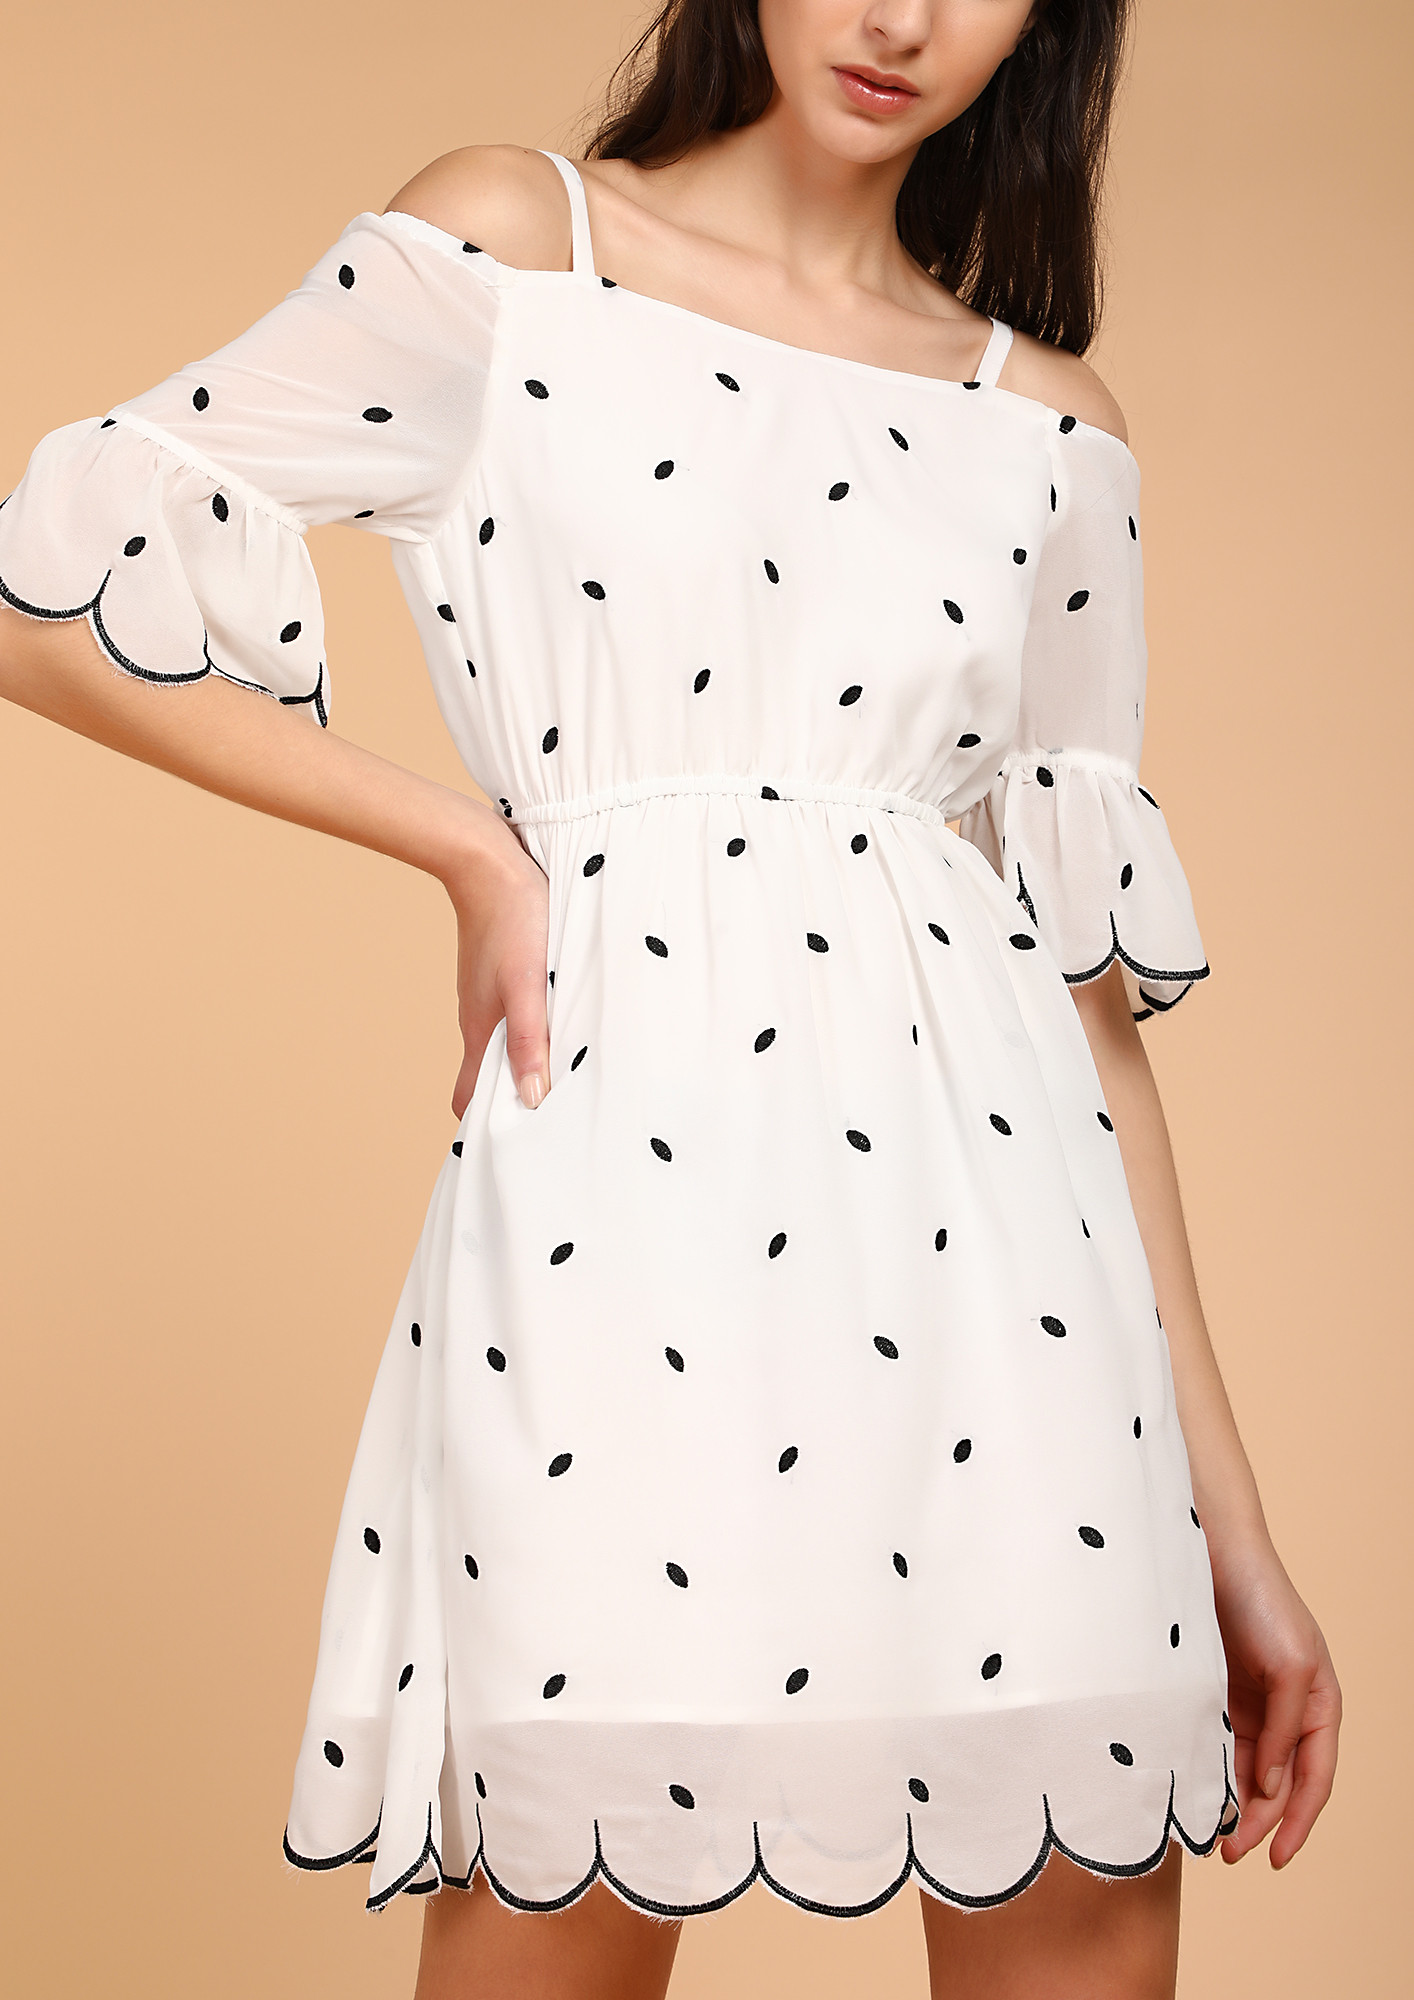 CAN'T SWITCH THE SPOTS WHITE SKATER DRESS